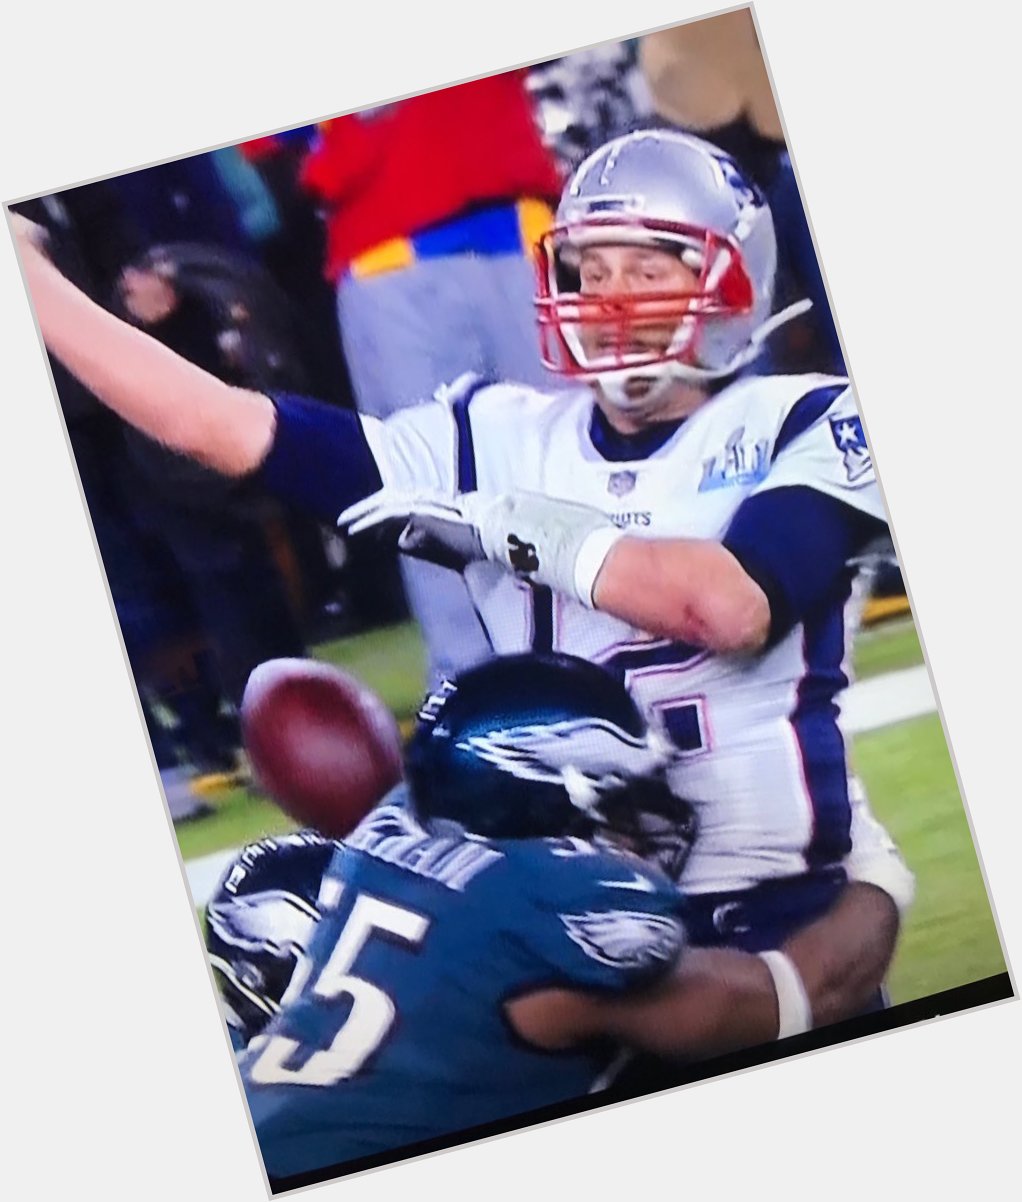 I forgot to wish Tom Brady a happy birthday yesterday, so I guess you could say I fumbled this opportunity. 